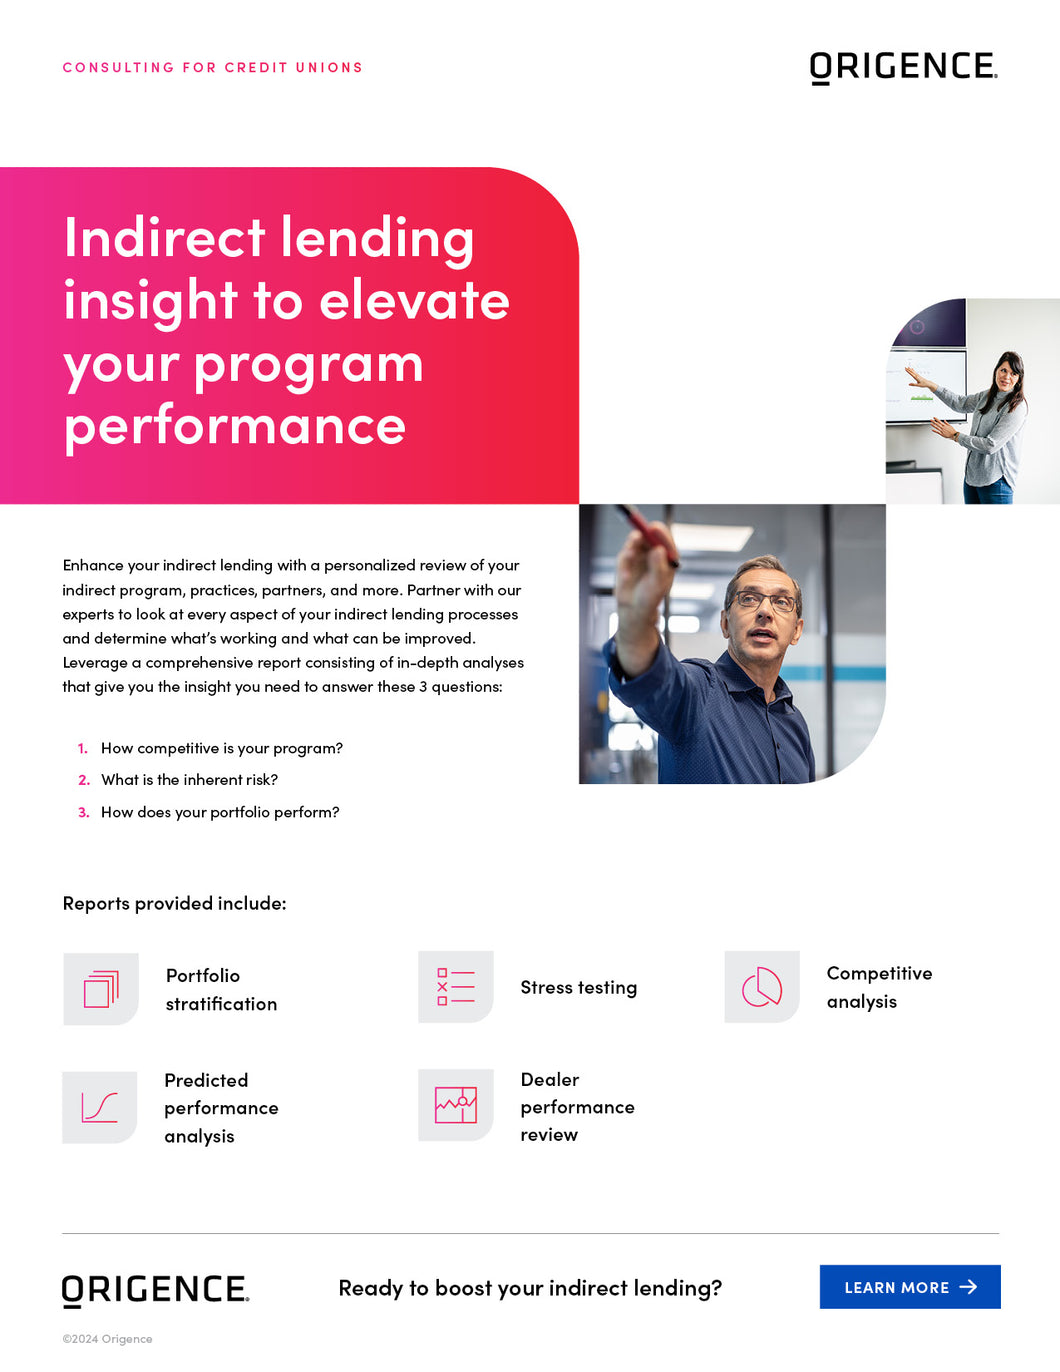 Consulting: Indirect Lending Sales Sheet (Credit Unions)